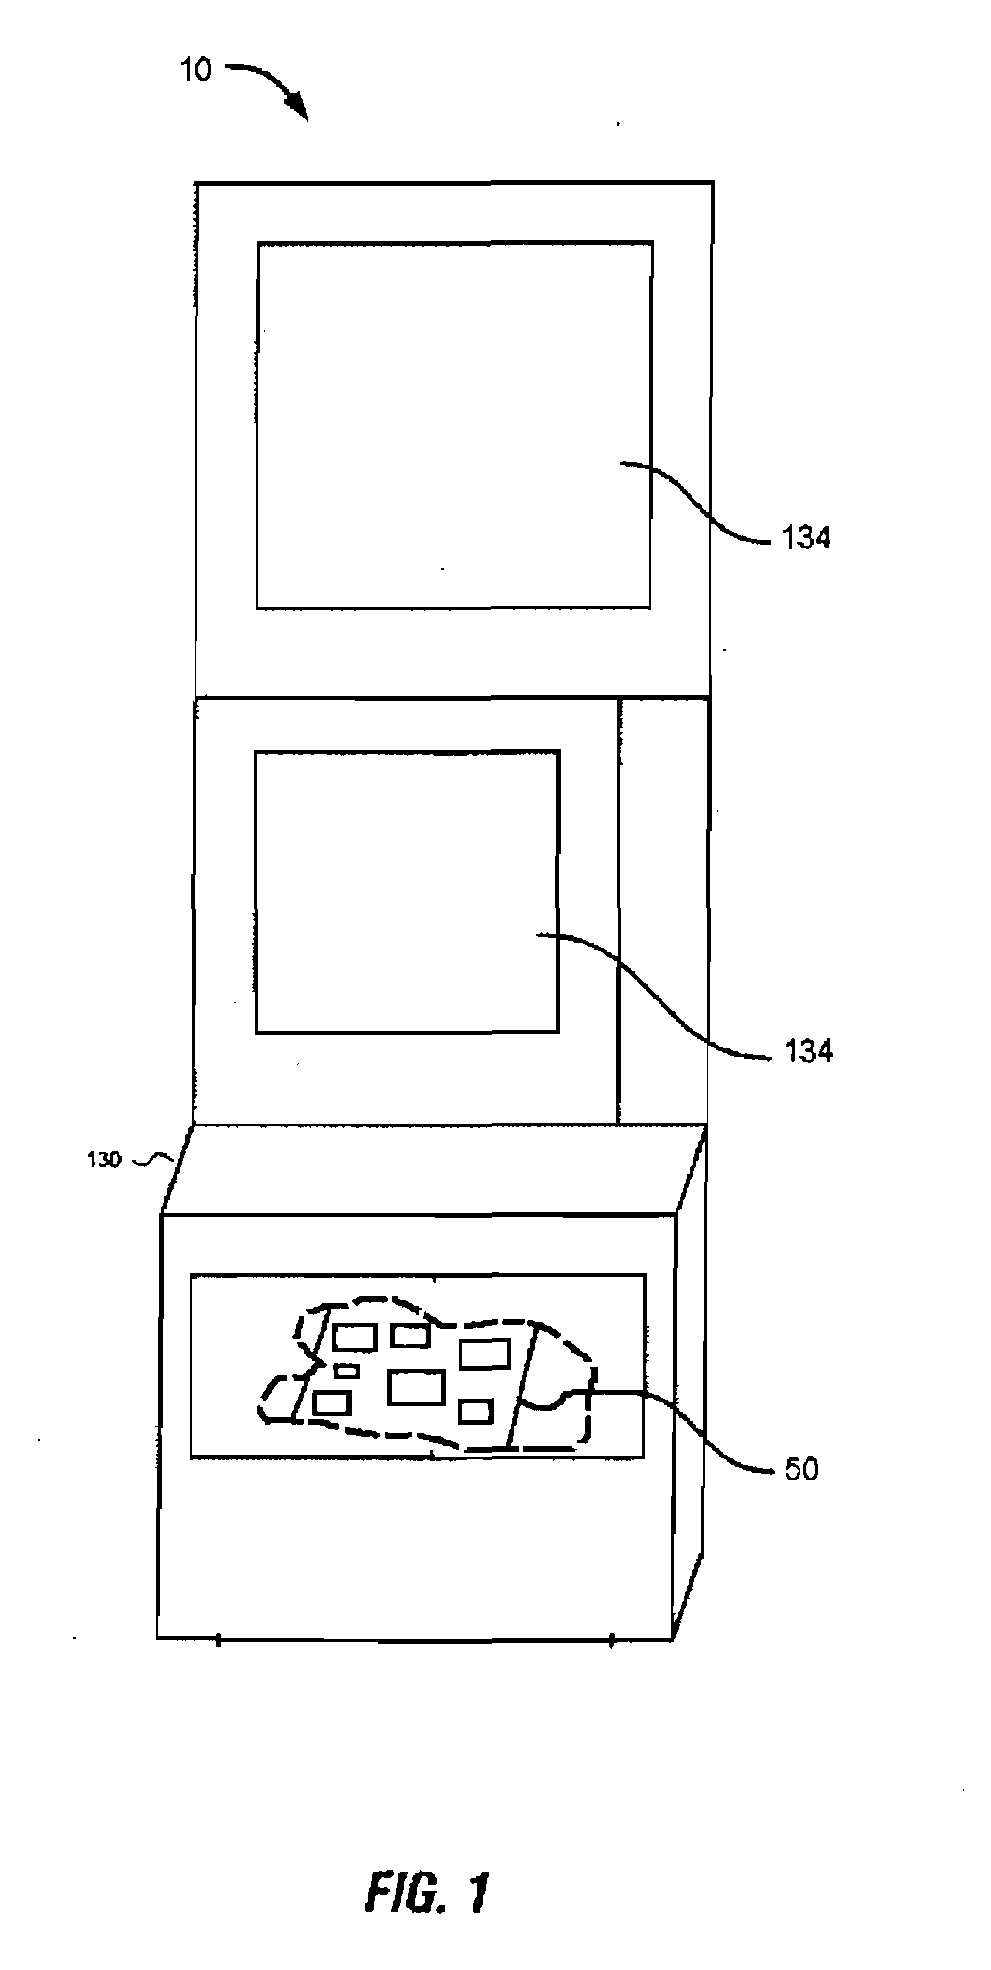 Authentication System for Gaming Machines